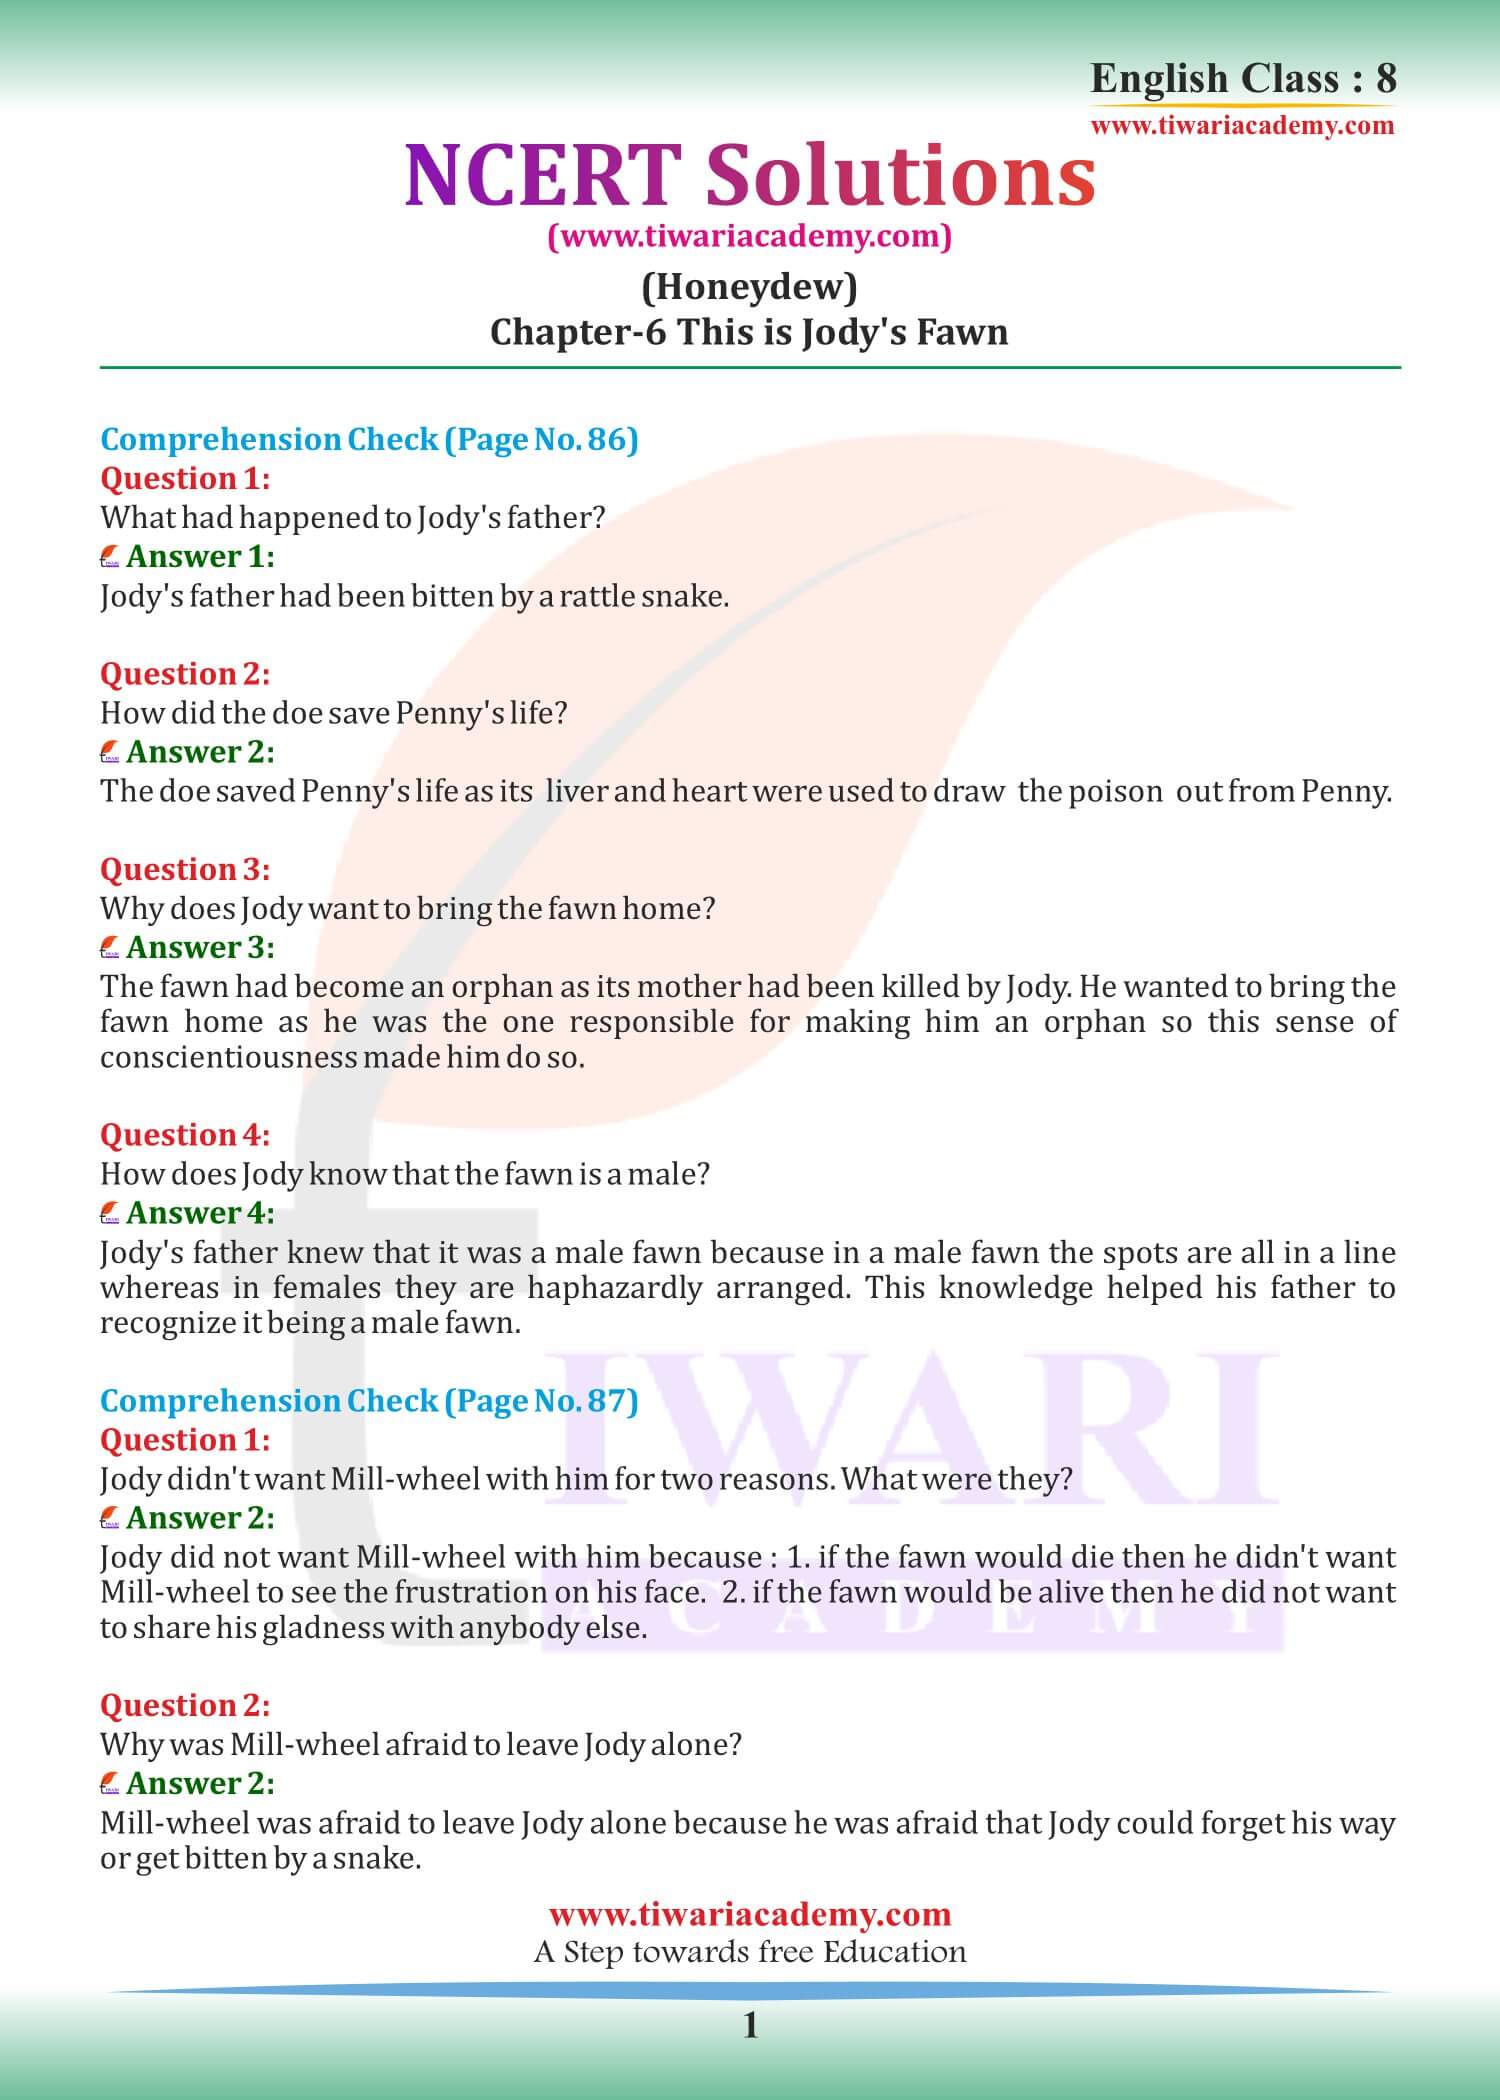 NCERT Solutions for Class 8 English Honeydew Chapter 6 This is Jody's Faun